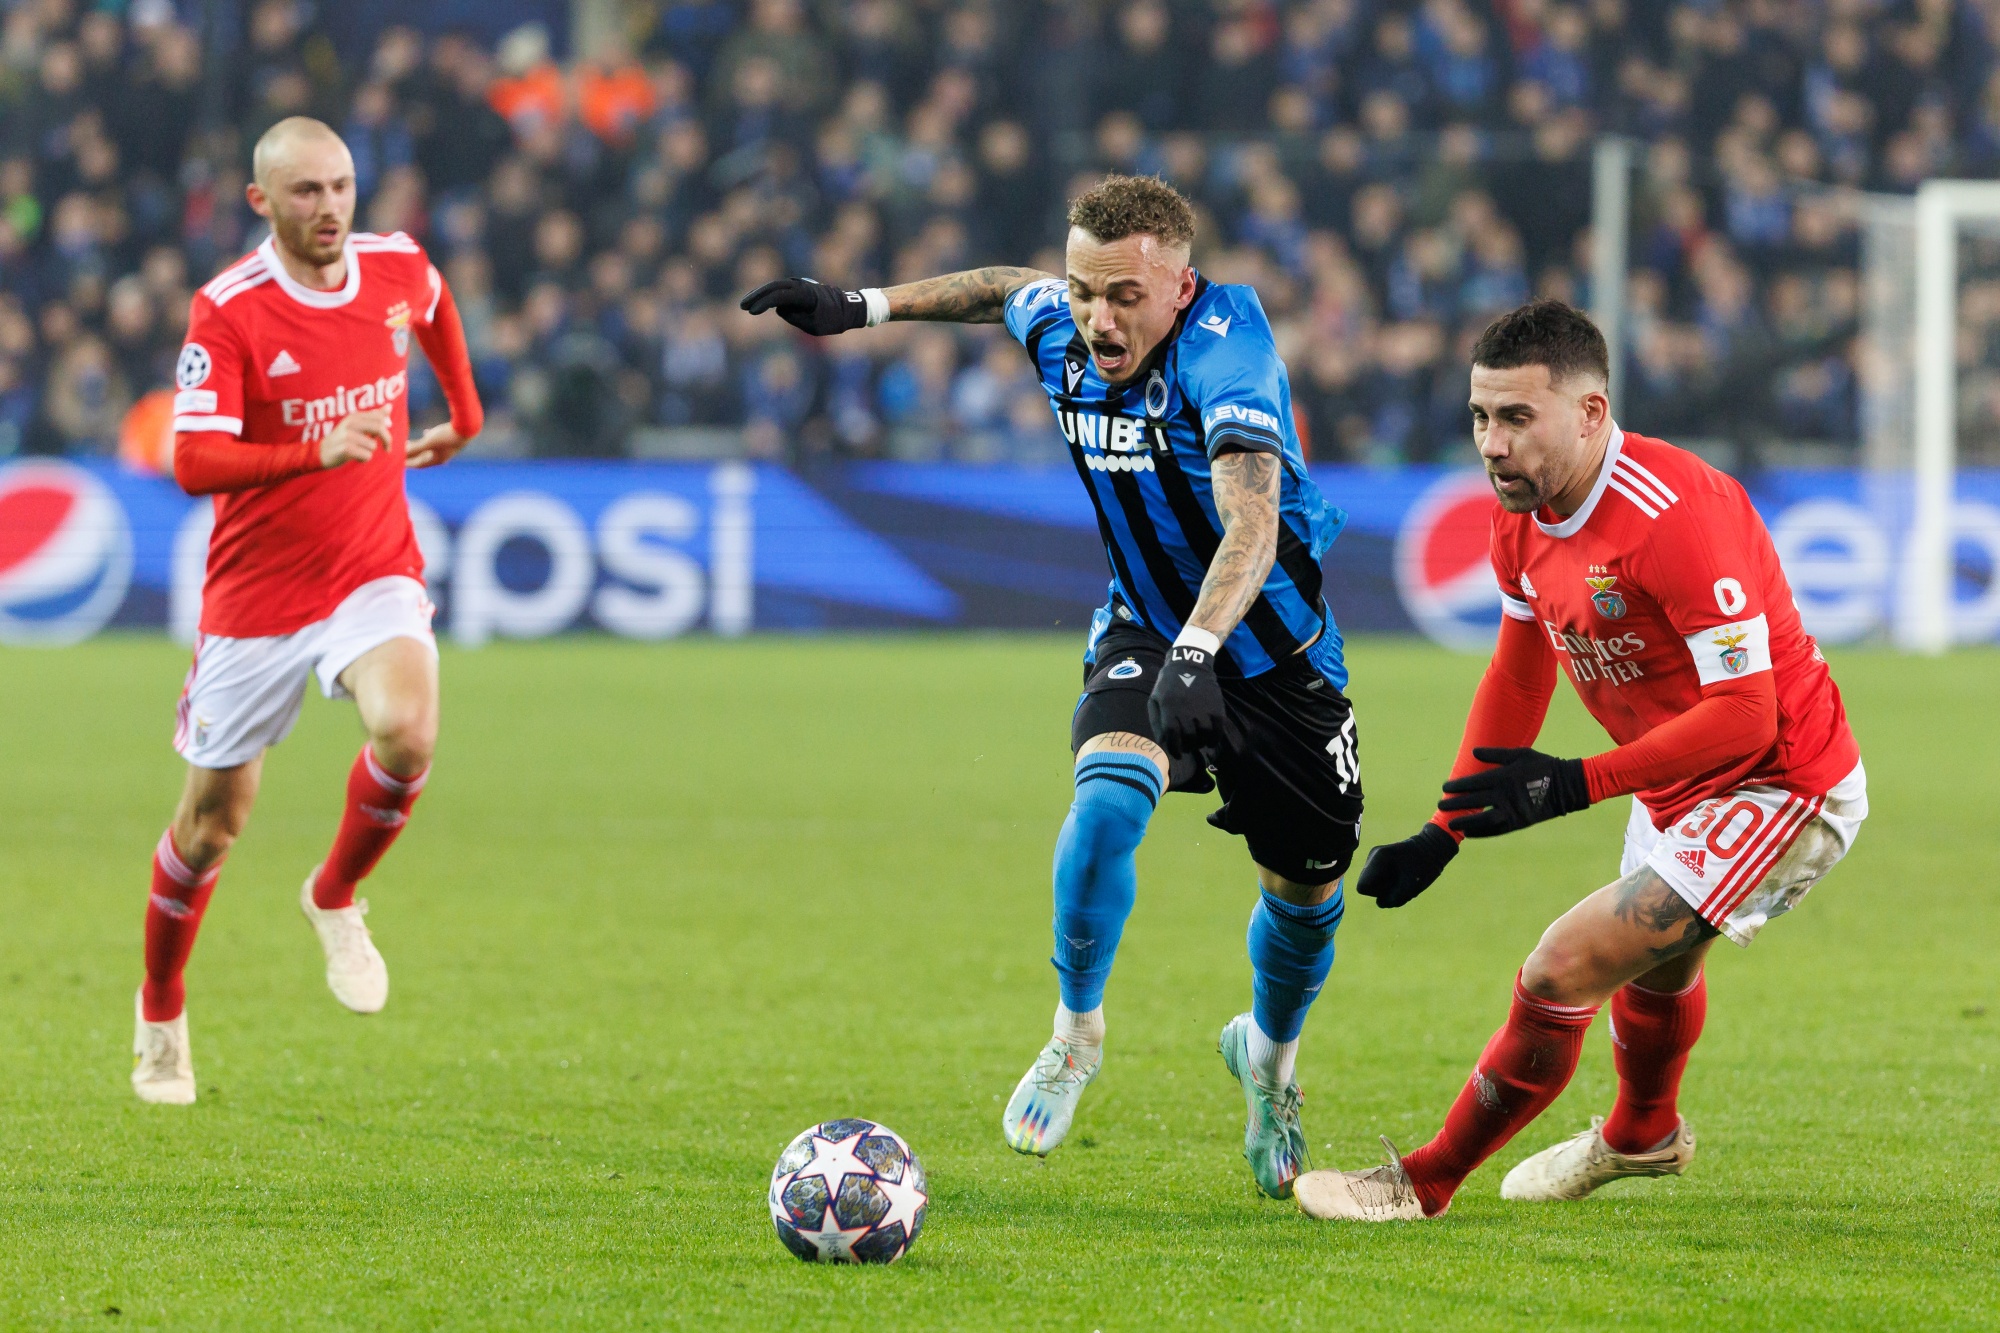 Club's Noa Lang and Benfica's Nicolas Otamendi fight for the ball during a soccer game between Belgian Club Brugge KV and Portuguese Sport Lisboa e Benfica, Wednesday 15 February 2023 in Brugge, the first leg of the round of 16 of the UEFA Champions League competition. BELGA PHOTO KURT DESPLENTER